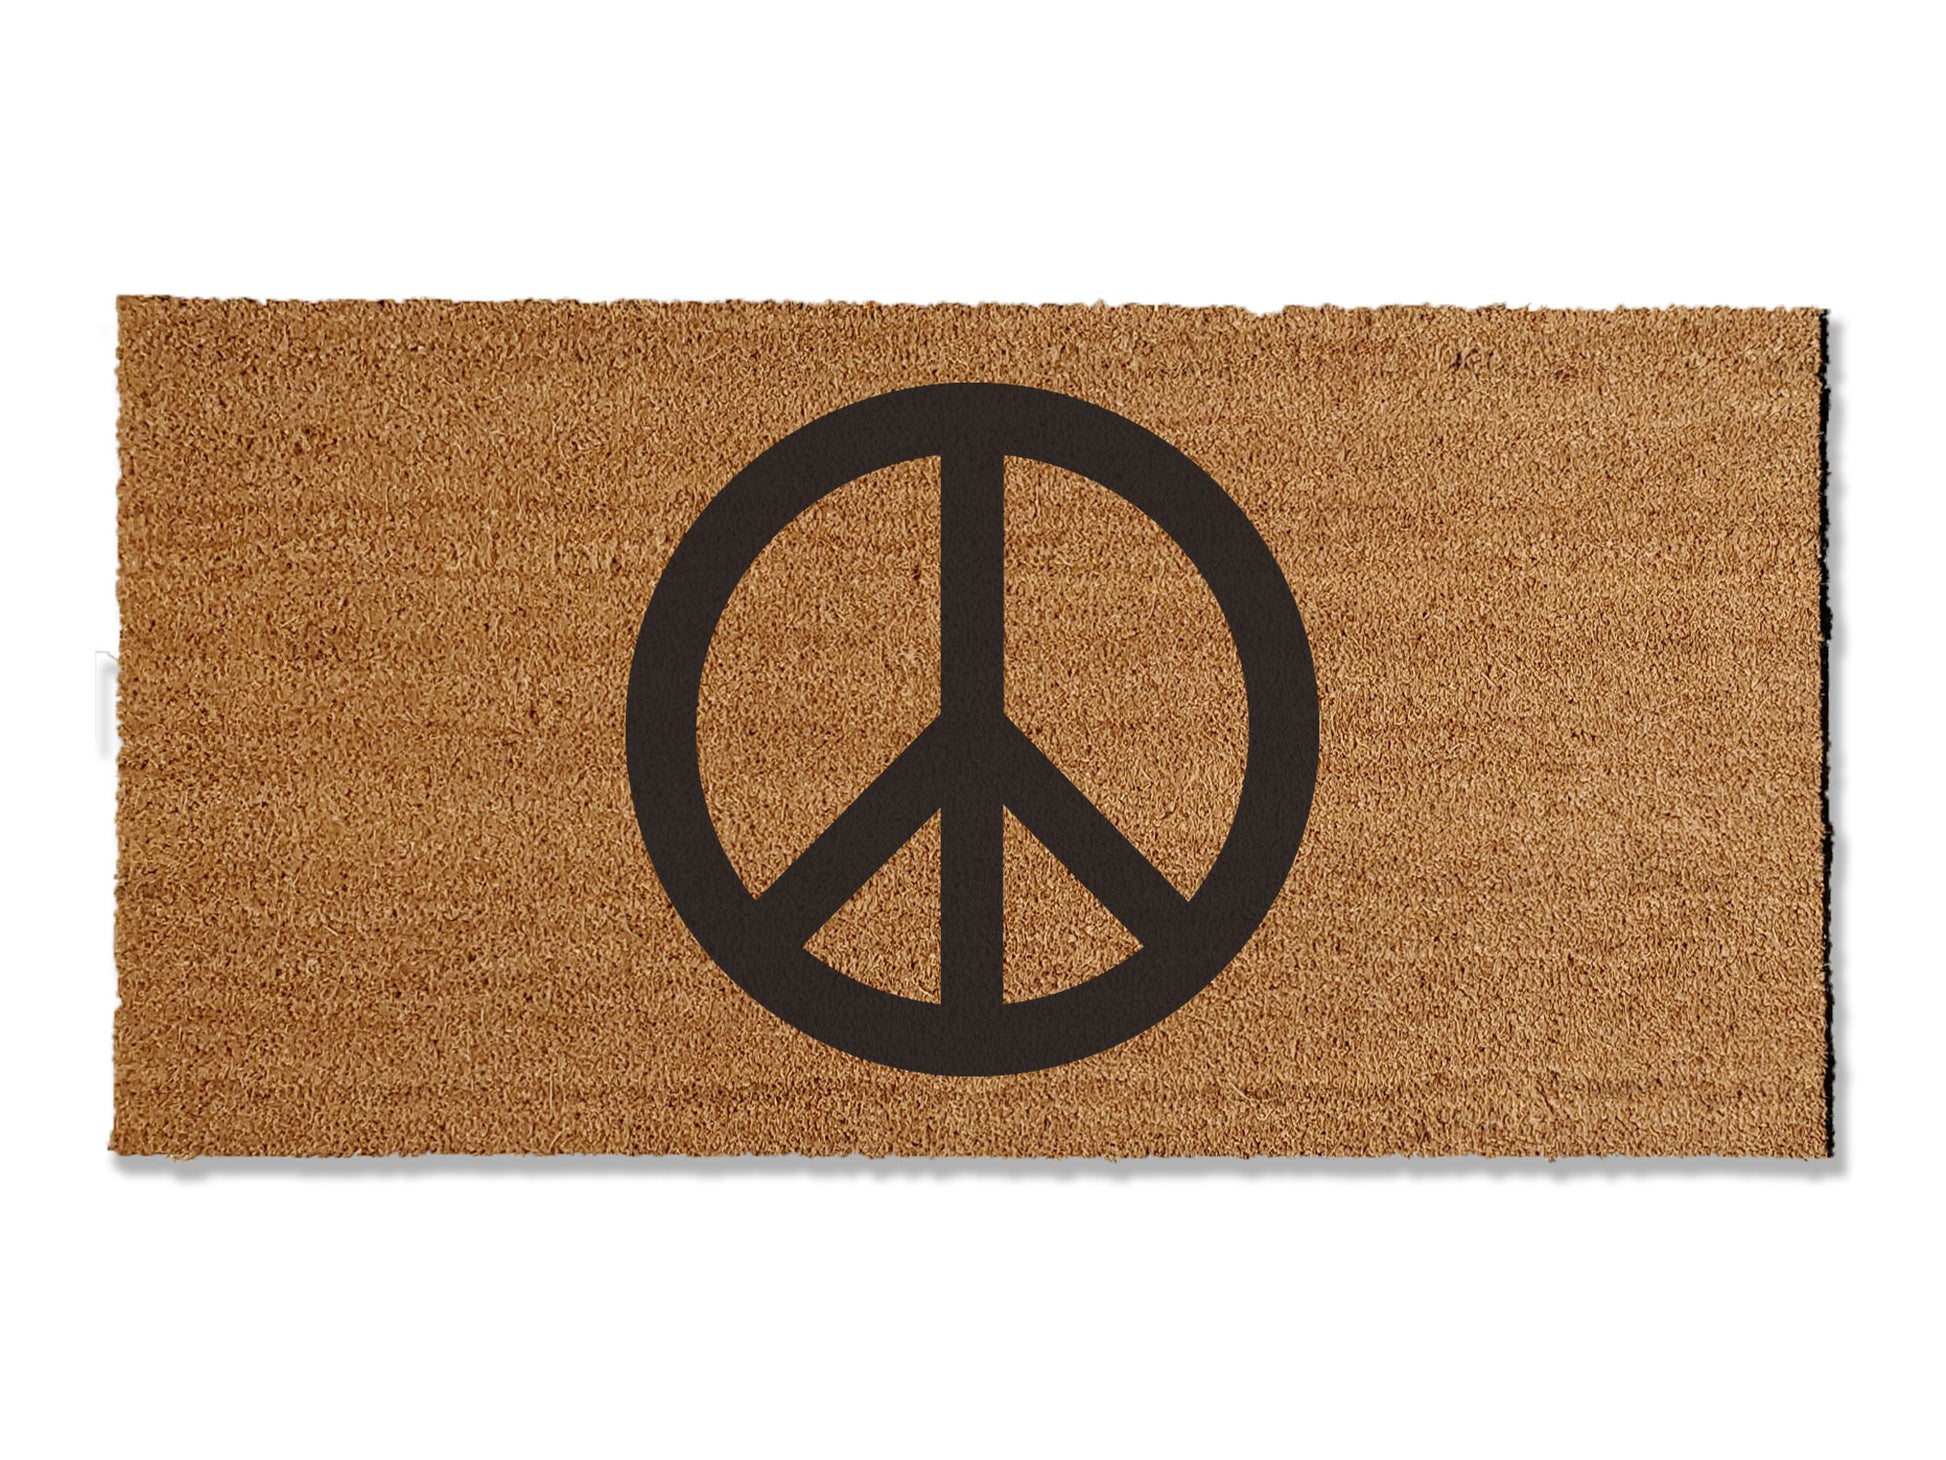 Add a touch of peace to your entryway with our coir doormat featuring a peace sign. The perfect addition to your home, this mat is sure to spread a sense of tranquility and welcome to all who enter. Elevate your doorstep with this stylish and meaningful coir doormat.